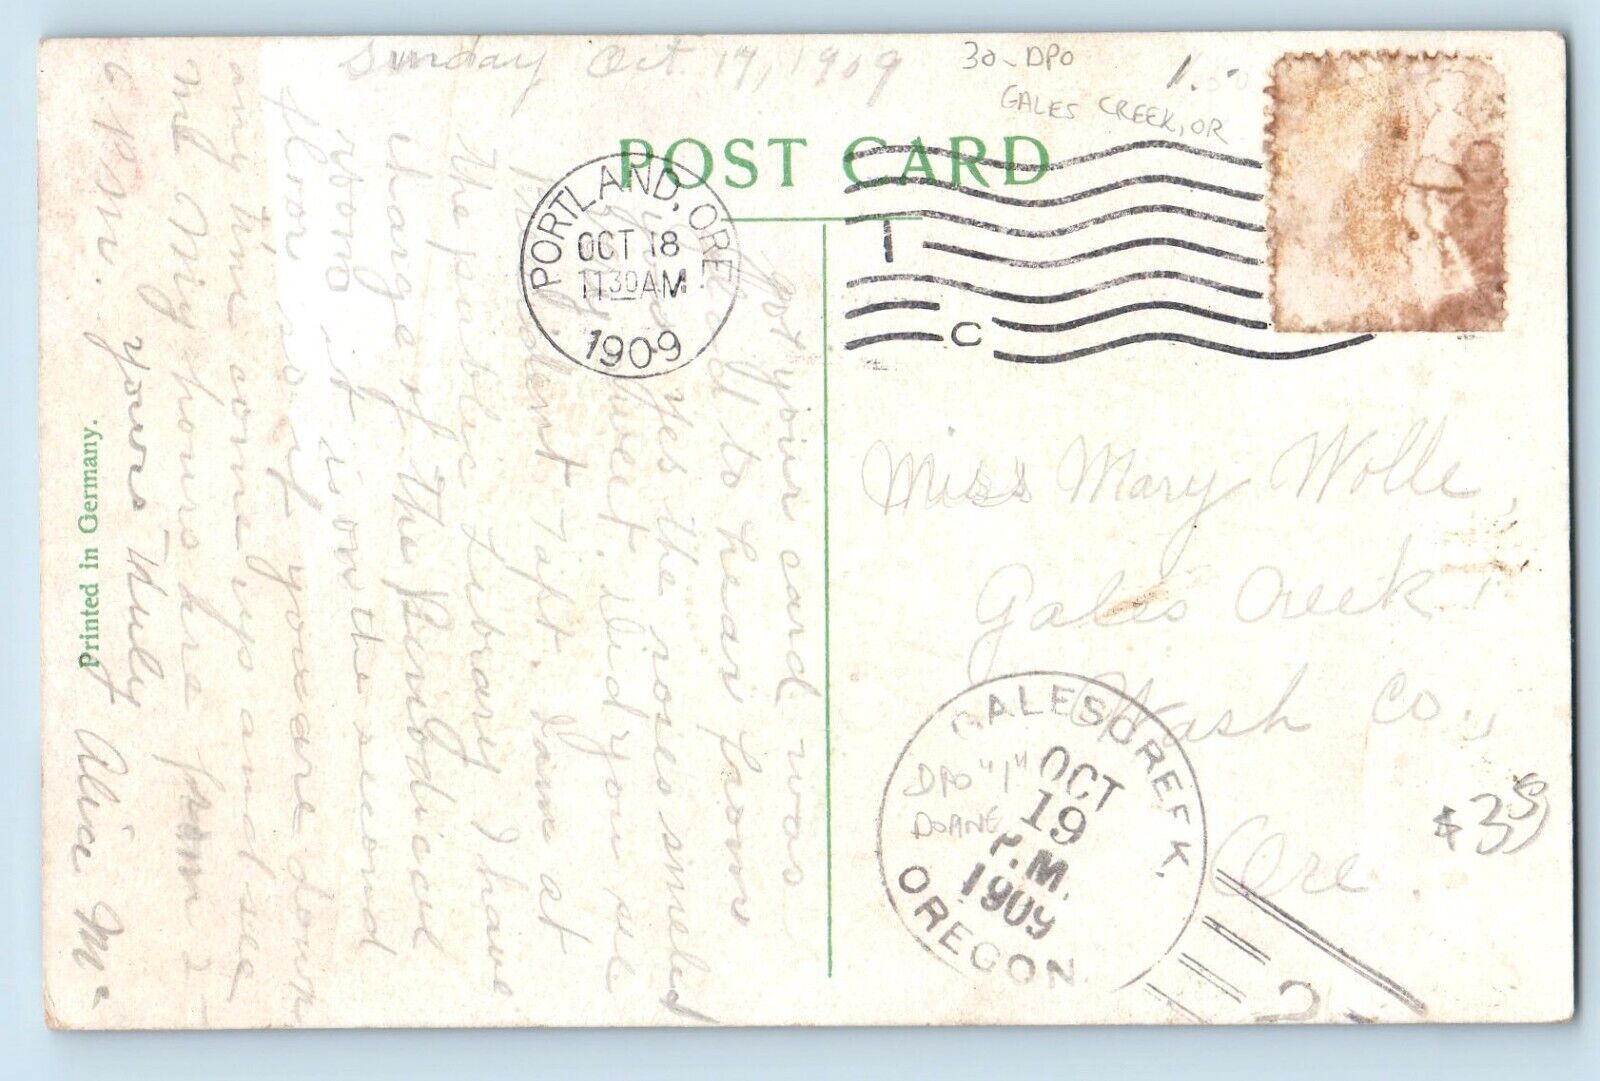 DPO Gales Creek Oregon OR Postcard Post Office Building 1909 Posted Antique